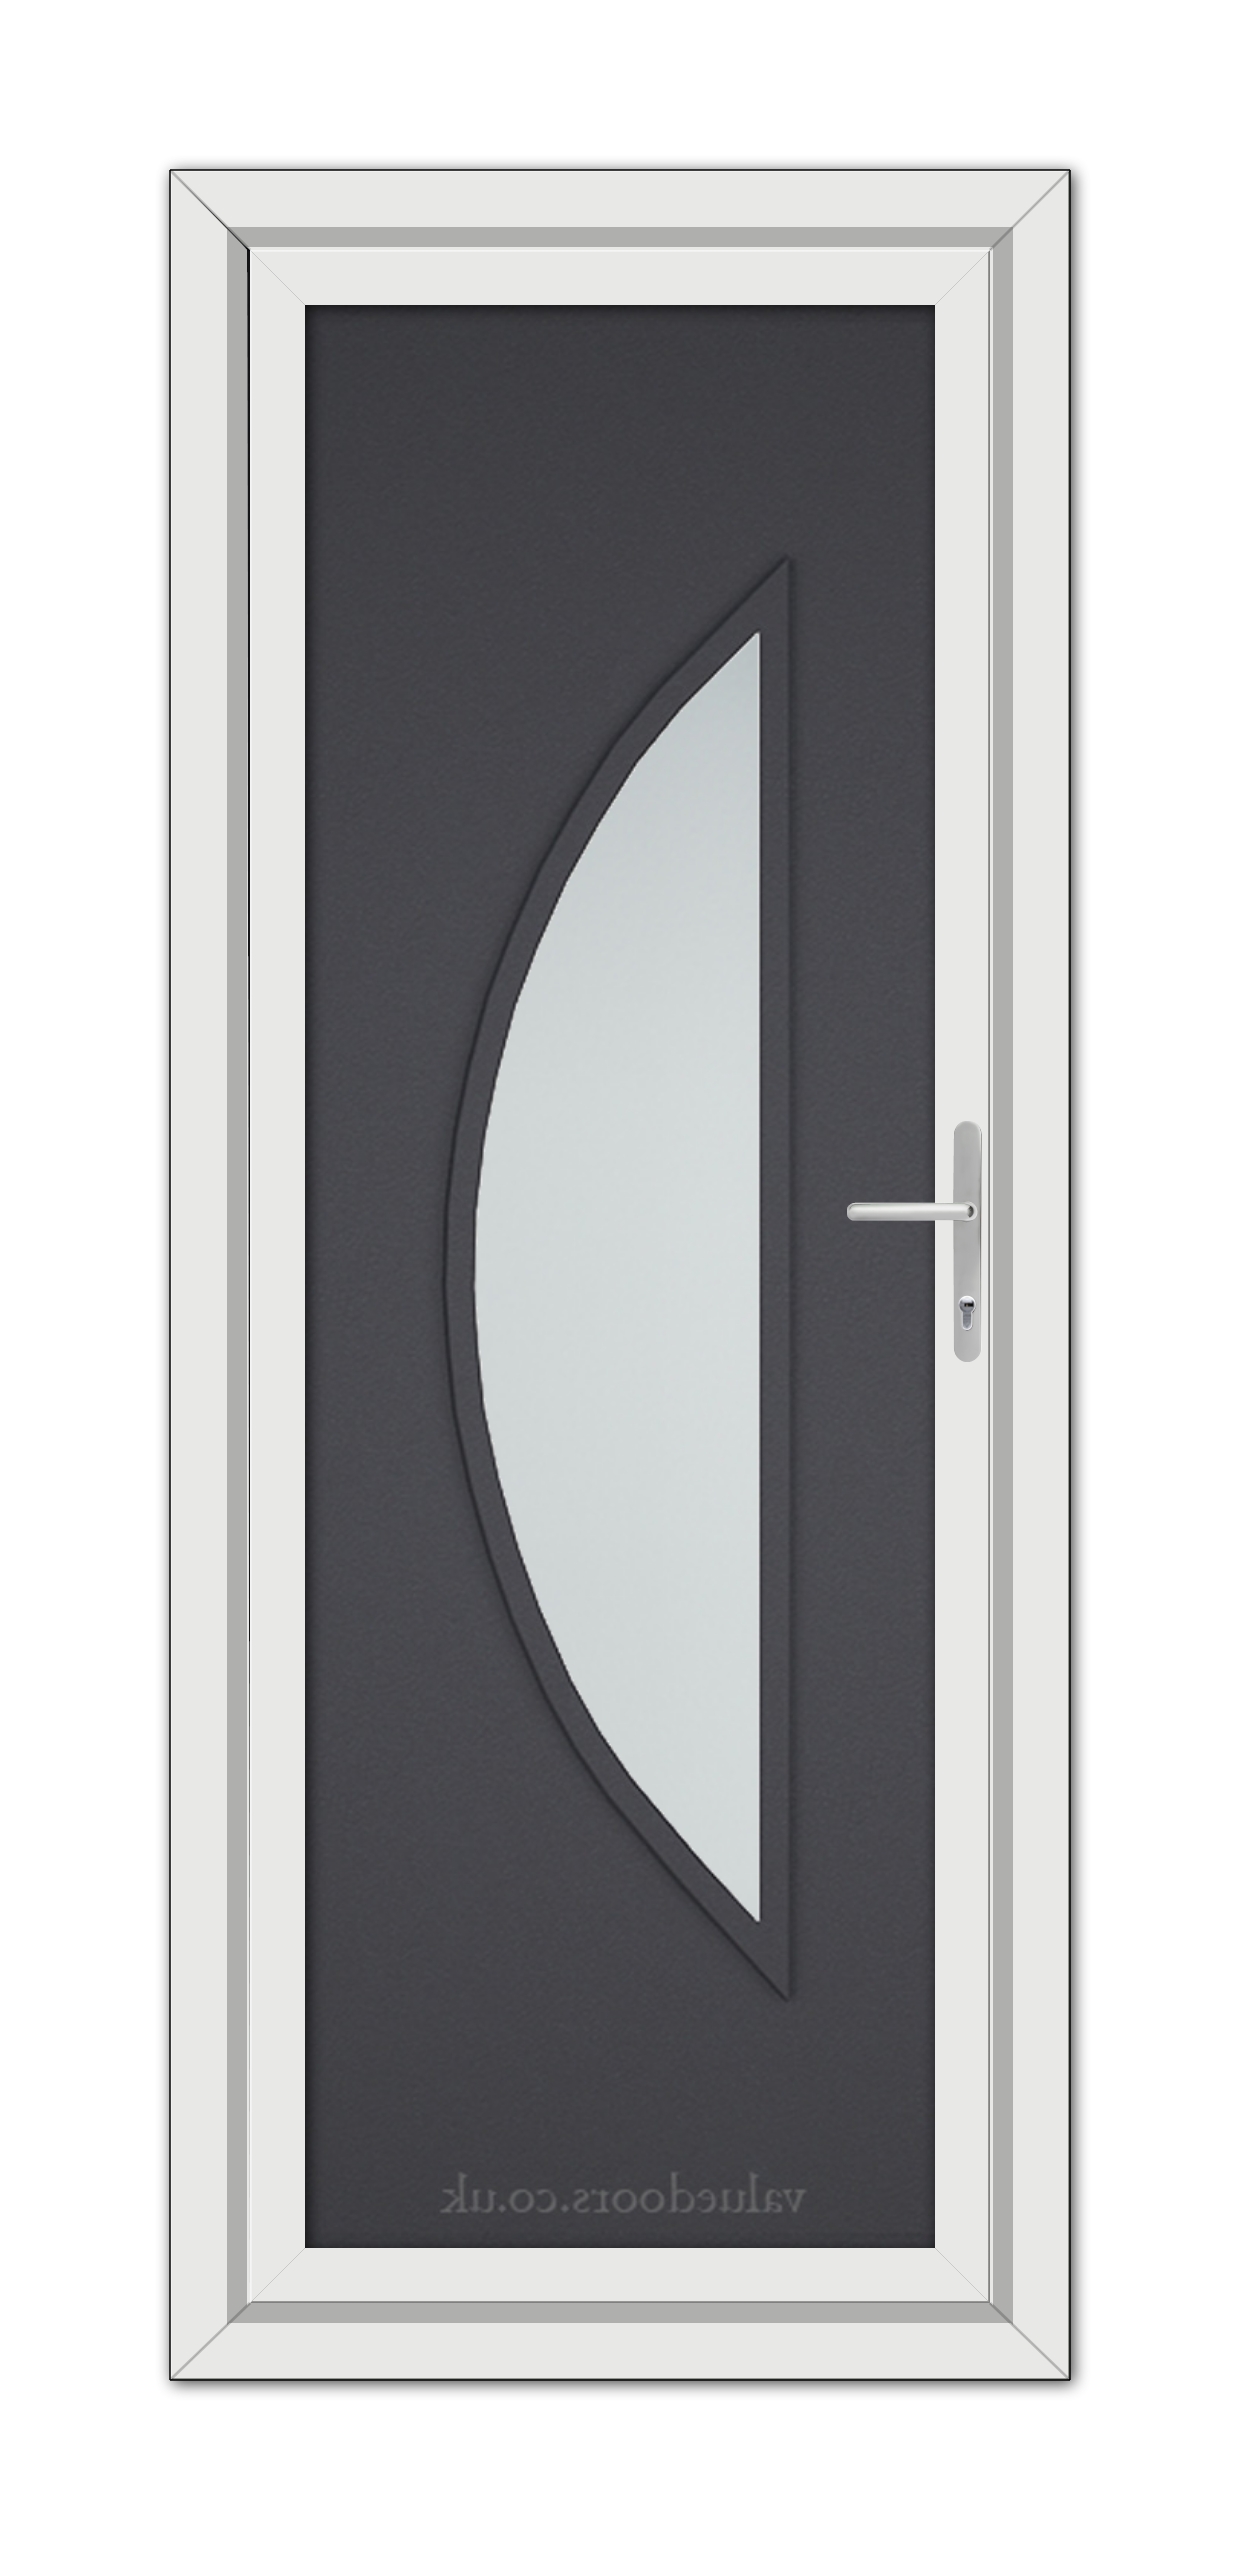 Grey Grained Modern 5051 uPVC Door featuring a vertical, off-center frosted glass panel, framed by a white surround, with a contemporary handle on the right.